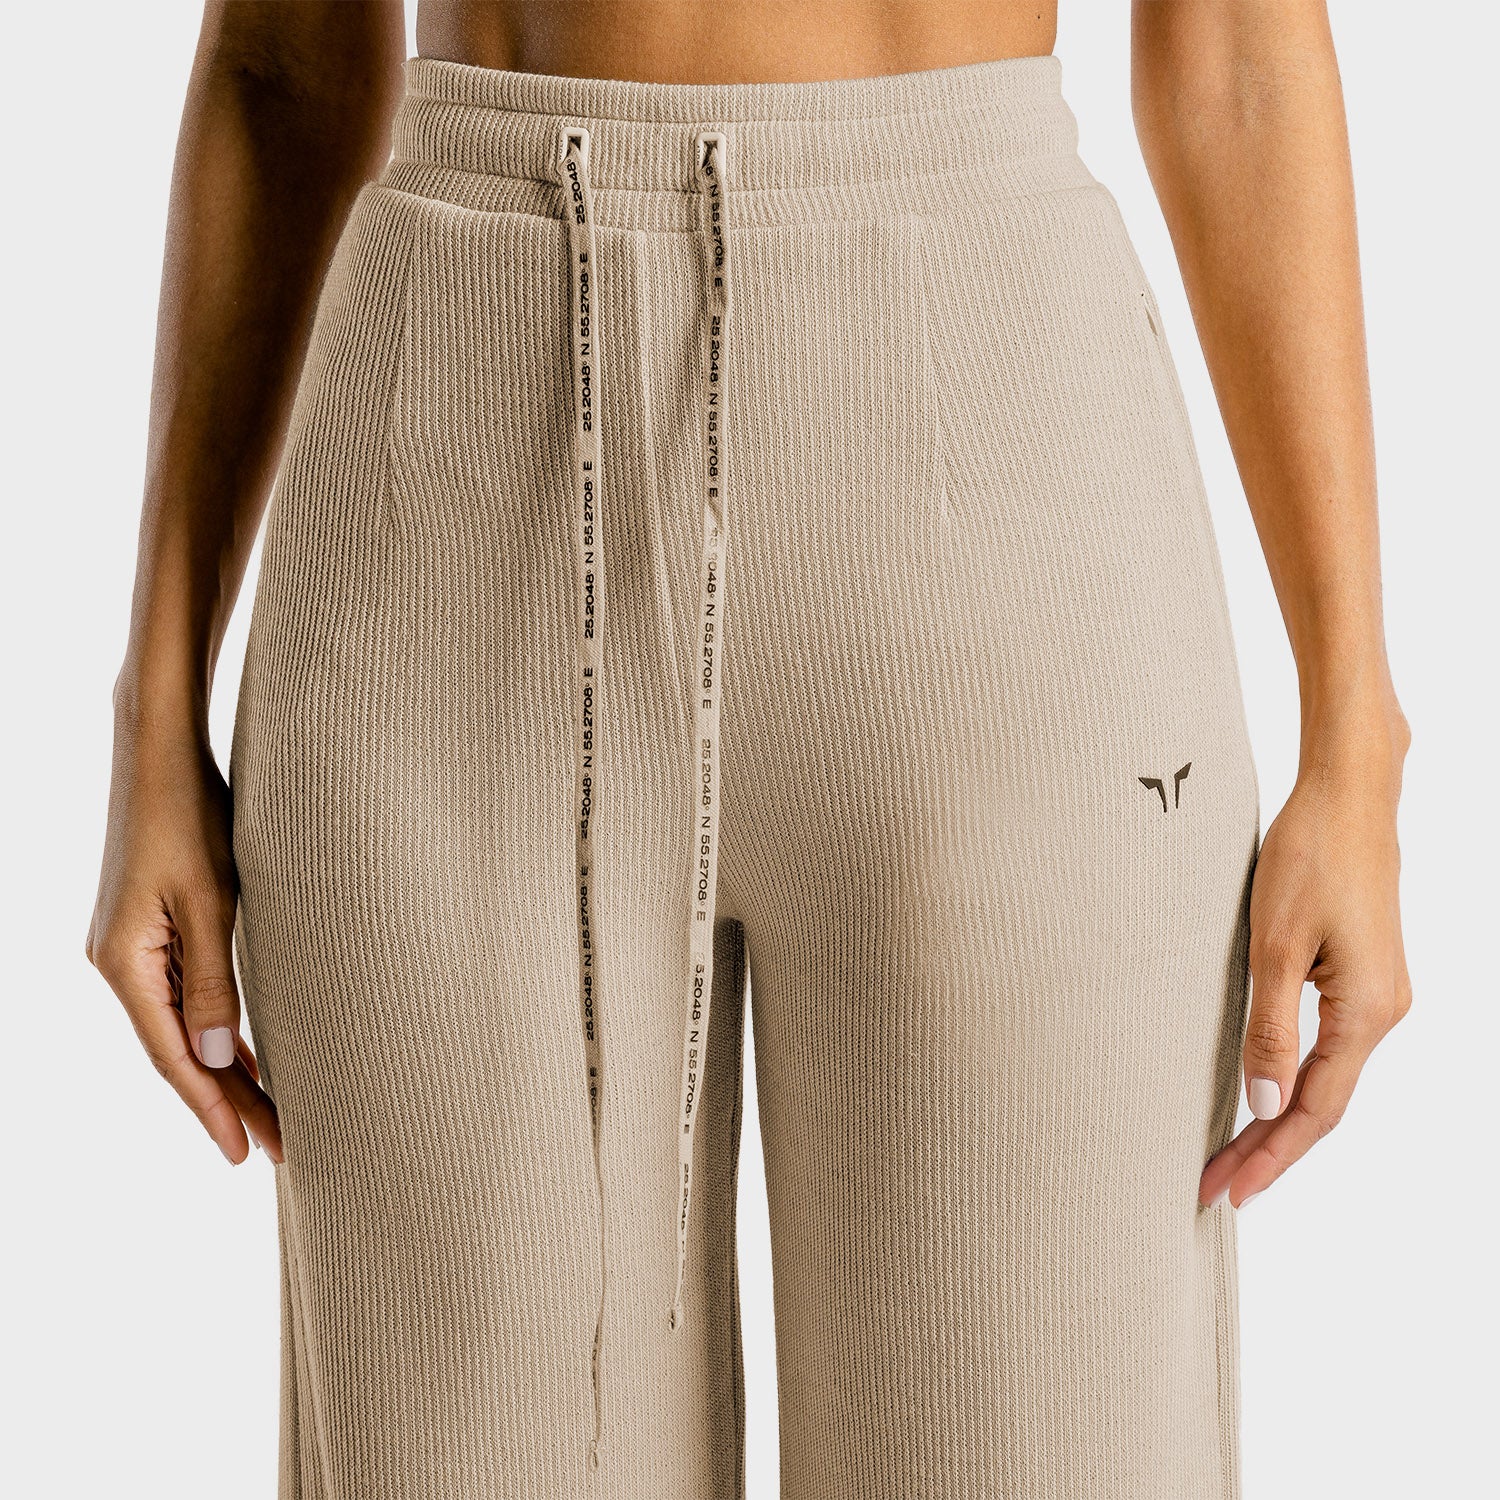 squatwolf-gym-pants-for-women-luxe-wide-leg-pants-stone-workout-clothes